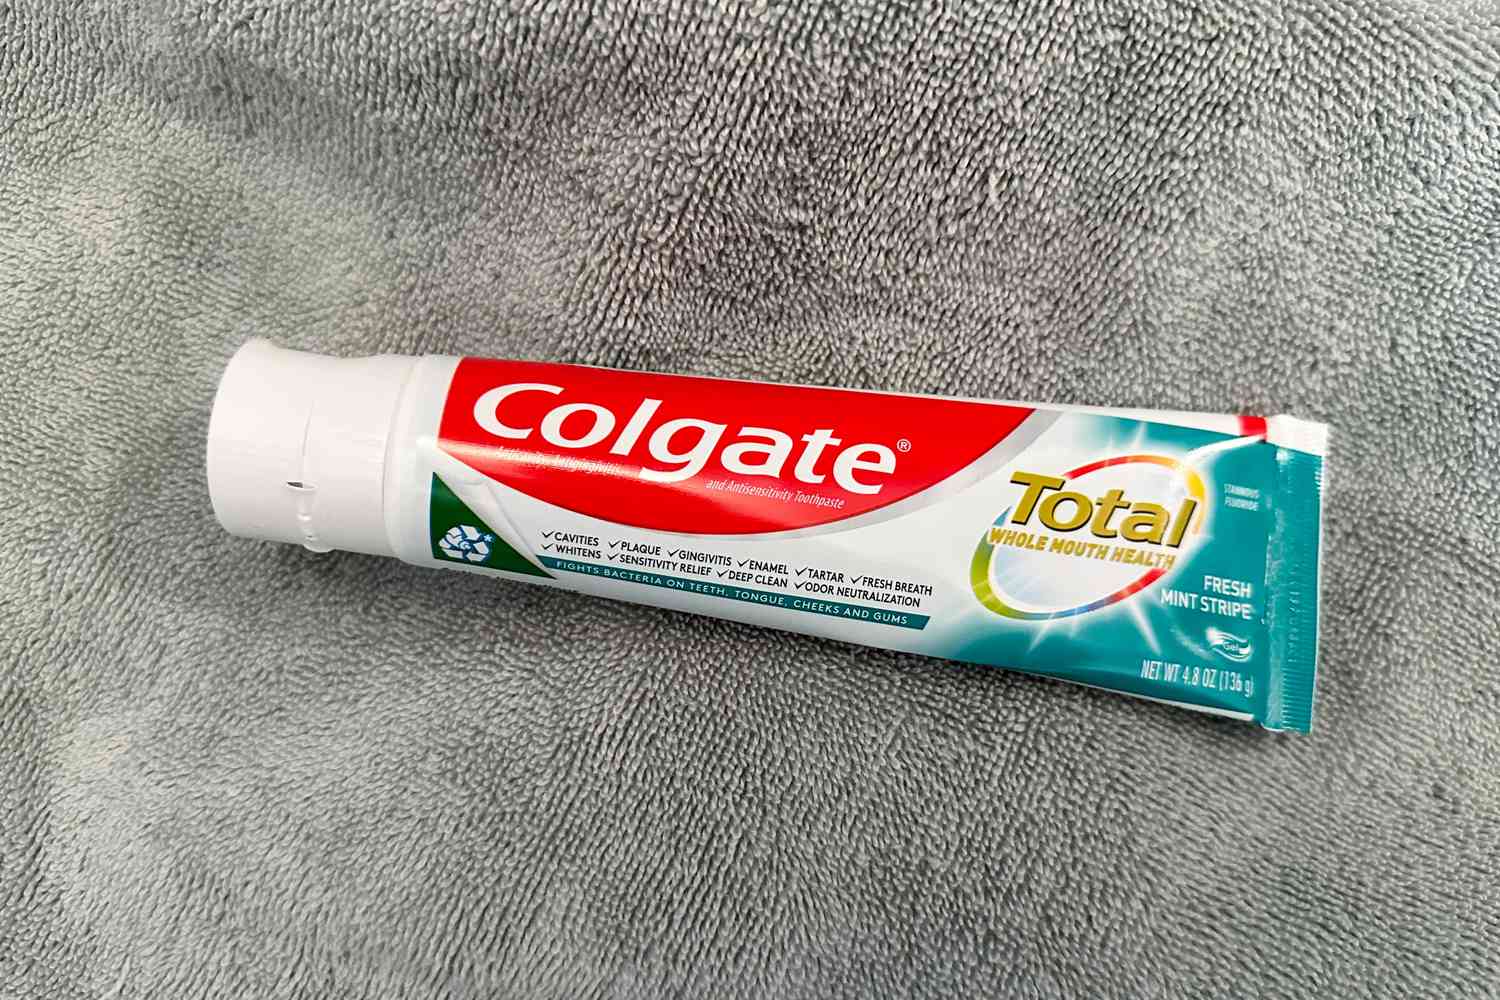 A tube of Colgate Total Fresh Mint Stripe Gel Toothpaste on a carpet